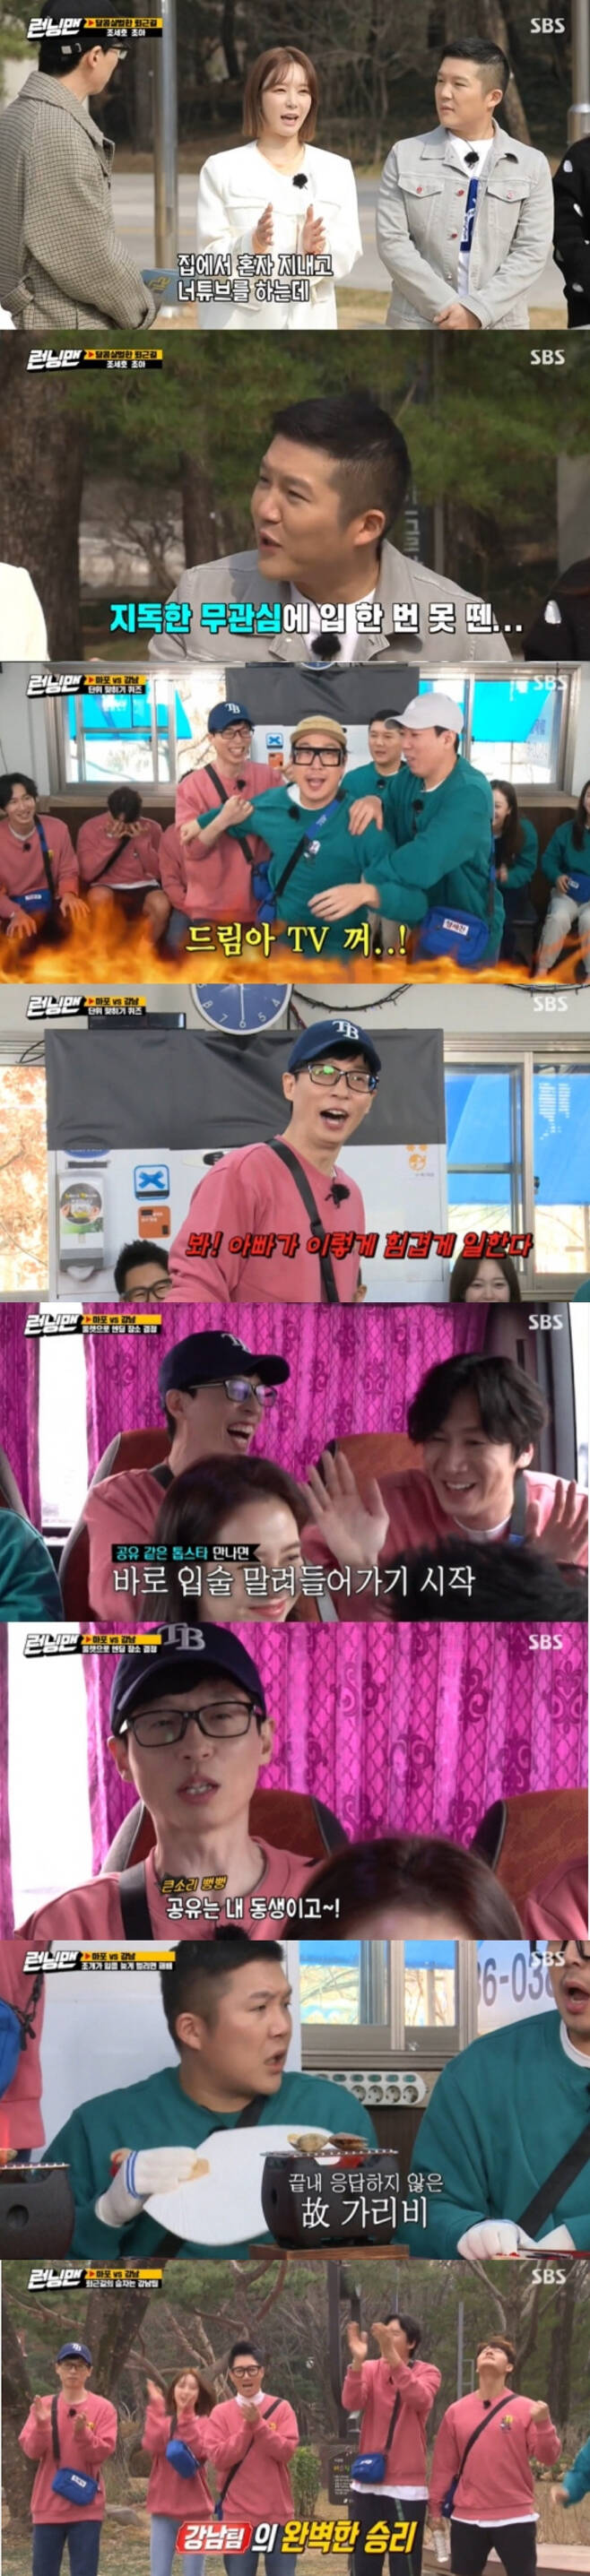 According to Nielsen Korea, a ratings agency on the 12th, Running Man, which was broadcast on the 11th, was the first in the same time zone with an average of 2.5% of the 2049 audience rating (based on households), which is the main target of SBS, and the highest audience rating per minute jumped to 6.5%.On this day, Race was decorated with Sweet and bloody work route race after finishing in the winning team area, and Jo Se-ho and Park Choa were guest.Yoo Jae-Suk, Ji Seok-jin, Kim Jong-kook, Lee Kwang-soo, Park Choa were divided into Gangnam District Team, Haha, Song Ji-hyo, Jeon So-min, Yang Se-chan, and Jo Se-ho were divided into DJ Maphorisa Team, and Gangnam District Team Kim Jong-kook was divided into 1 in Premission He took the first mission place as a Banpo.The first mission was a quiz, and the Gangnam District team, which was filled with brains, cheered.Unexpectedly, the Kang team continued to struggle, and DJ Maphorisa team took the victory by hitting the quiz problem in succession.DJ Maphorisa team Choices Dongbinggo-dong as next mission sitePark Choa and Jo Se-ho laughed with a variety of recent talks.Park Choa, who has been with Running Man in six years, said, I have been lying down for three years and I am familiar with TV.Jo Se-ho disclosures the privacy of Lee Kwang-soo and Yoo Jae-Suk with a gym talk.Jo Se-ho described Lee Kwang-soos distorted expression, saying, Lee Kwang-soo does a health with the weight that should not be done. Lee Kwang-soo said, Yoo Jae-Suk points out when he meets Jo Se-ho at the gym, He laughed.The Gangnam District team won all the missions in Dongbinggo-dong and Gangnam District, preempting the favorable highlands and winning the final mission in Yeoksam-dong with Park Choas performance.Eventually, the final ending area was also Choicesed to Gangnam District, which secured a lot of roulette compartments, and Gangnam District endings were conducted.The Gangnam District team took the famous rice cake set of Gangnam District, and DJ Maphorisa team had the bad luck of going to a long workday.The scene won the best one minute with a highest audience rating of 6.5 percent per minute.